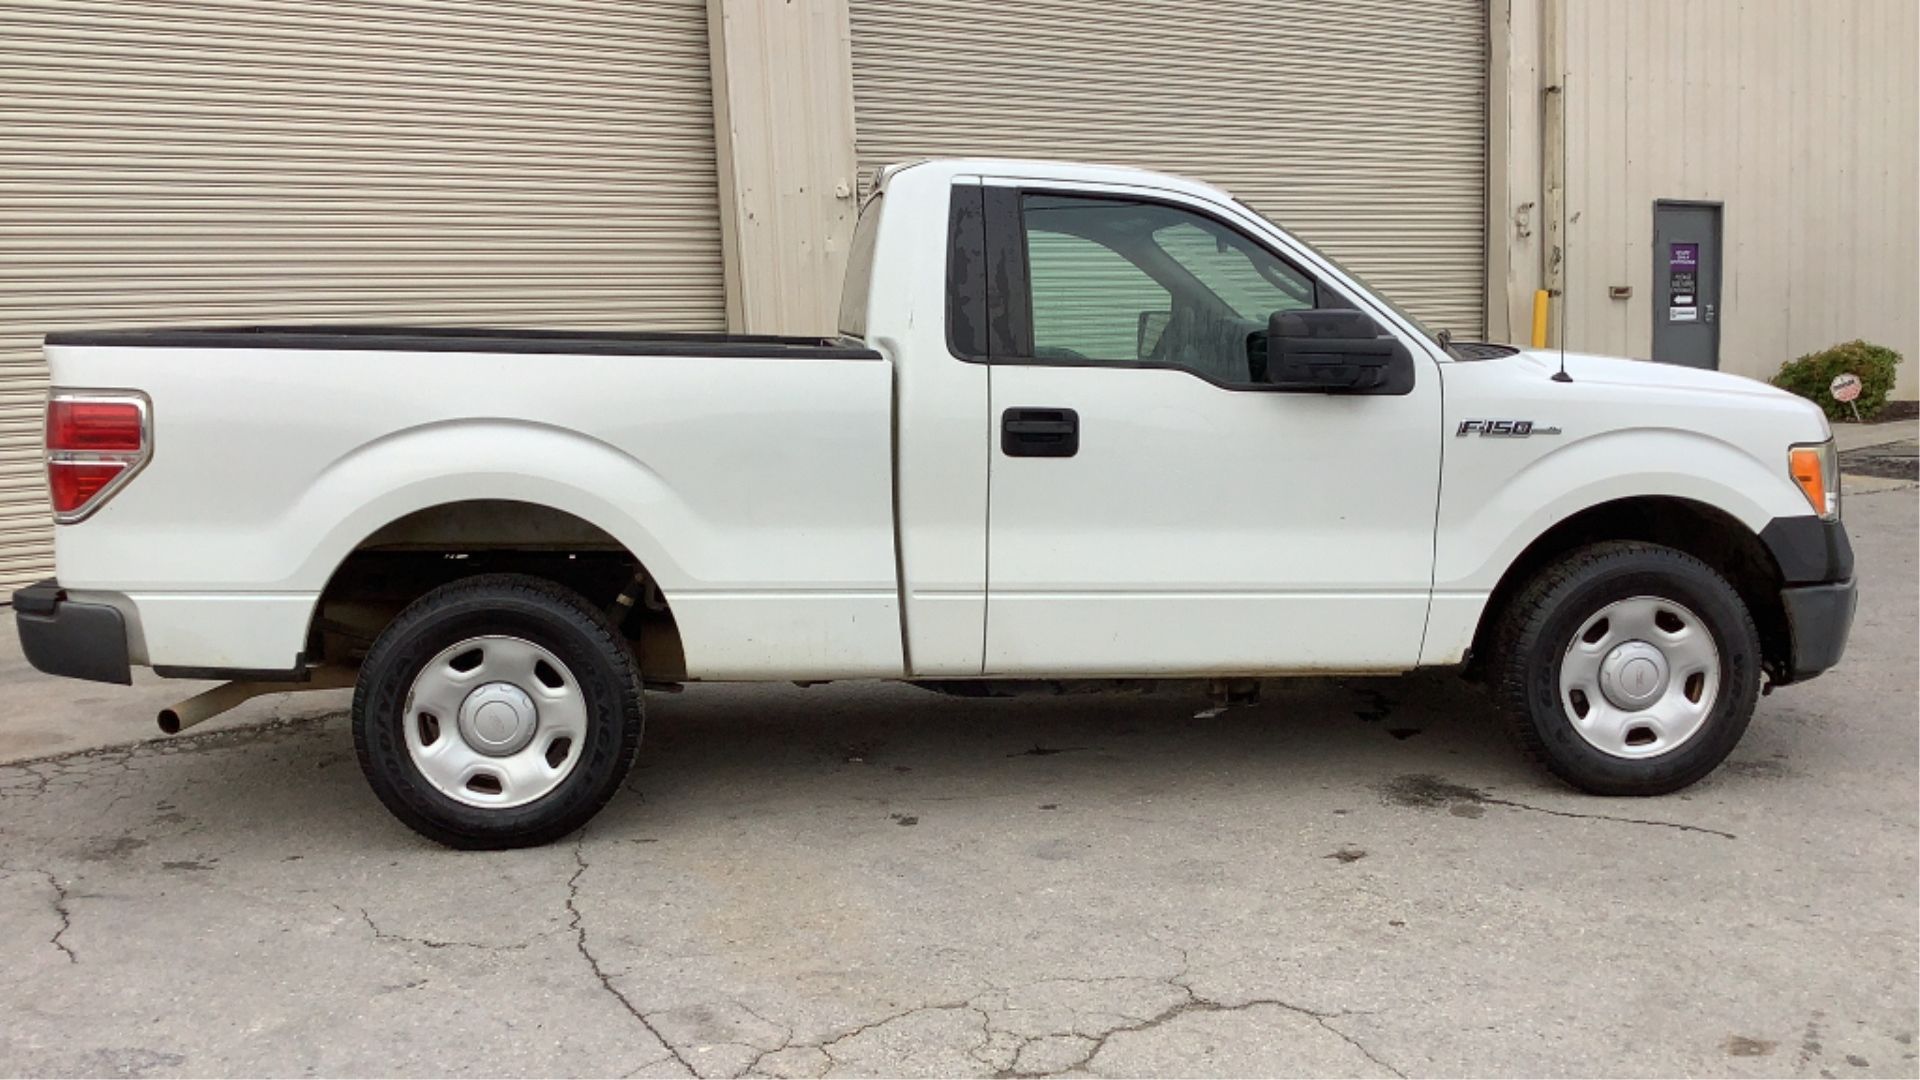 2009 Ford F-150 Regular Cab XL 2WD - Image 21 of 71